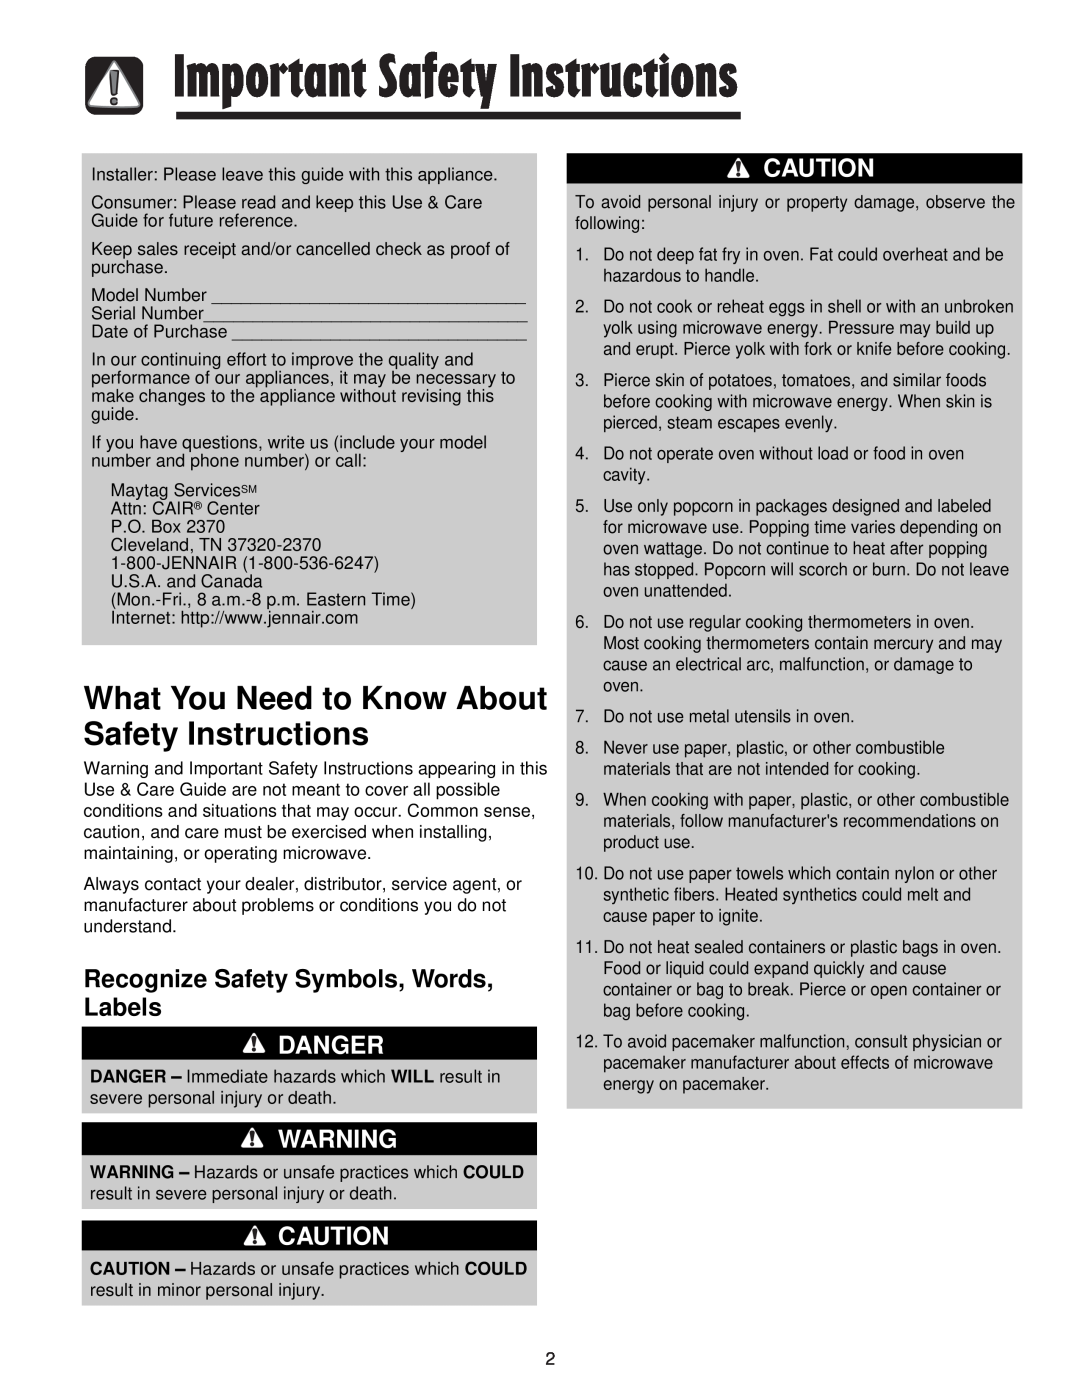 Maytag JMV8208AA/AC Important Safety Instructions, What You Need to Know About Safety Instructions, Danger 